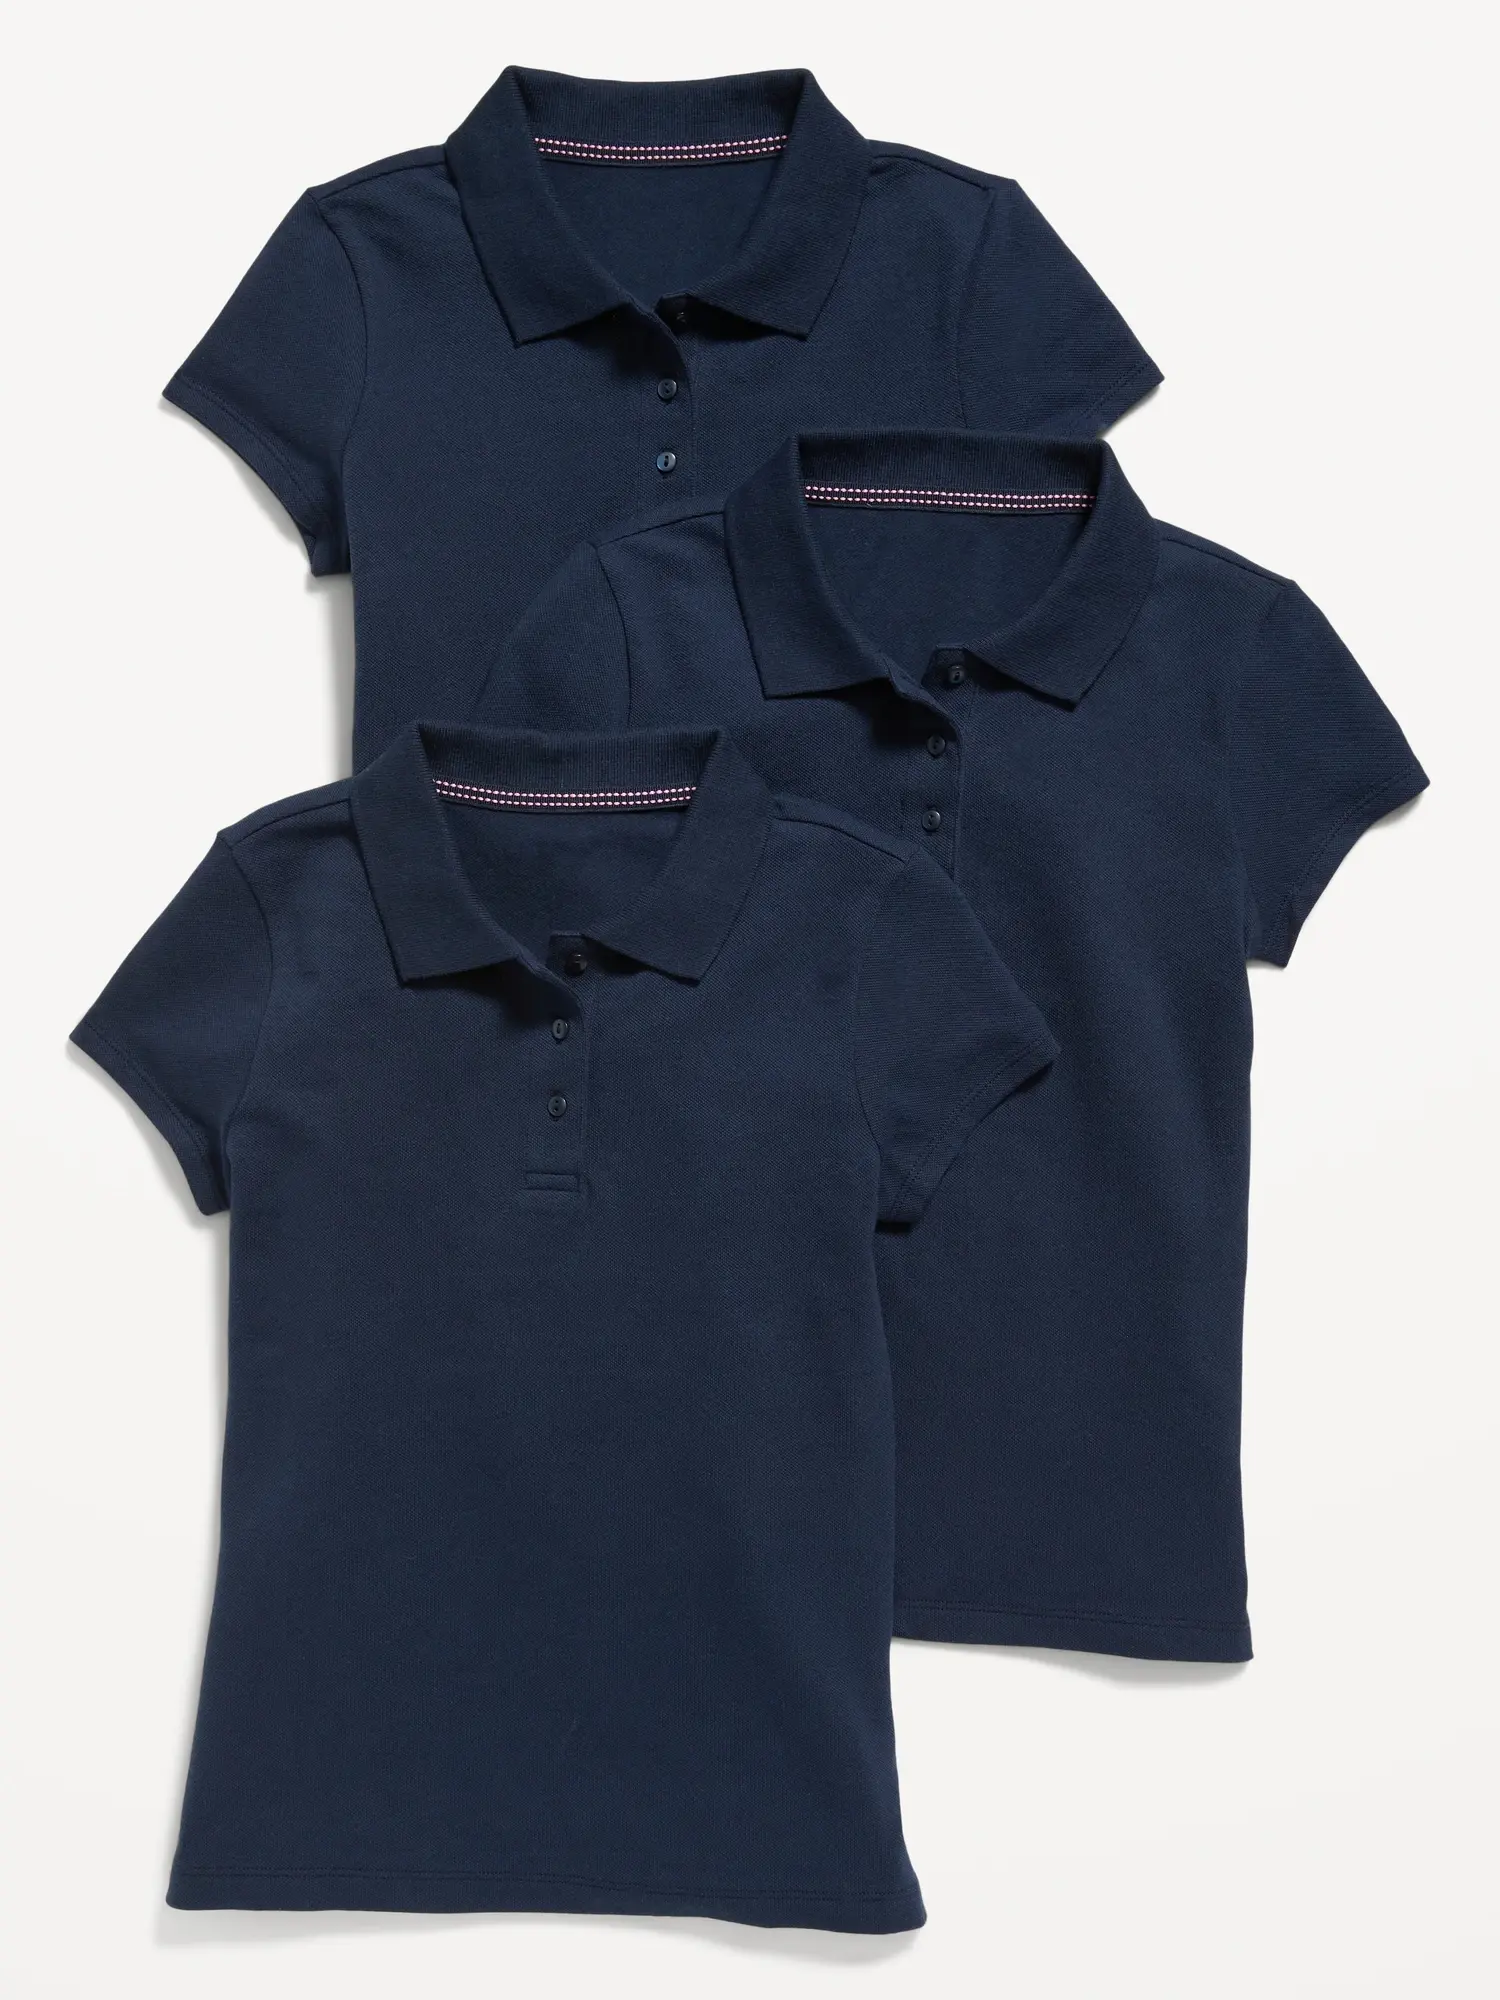 Old Navy Uniform Pique Polo Shirt 3-Pack for Girls blue. 1